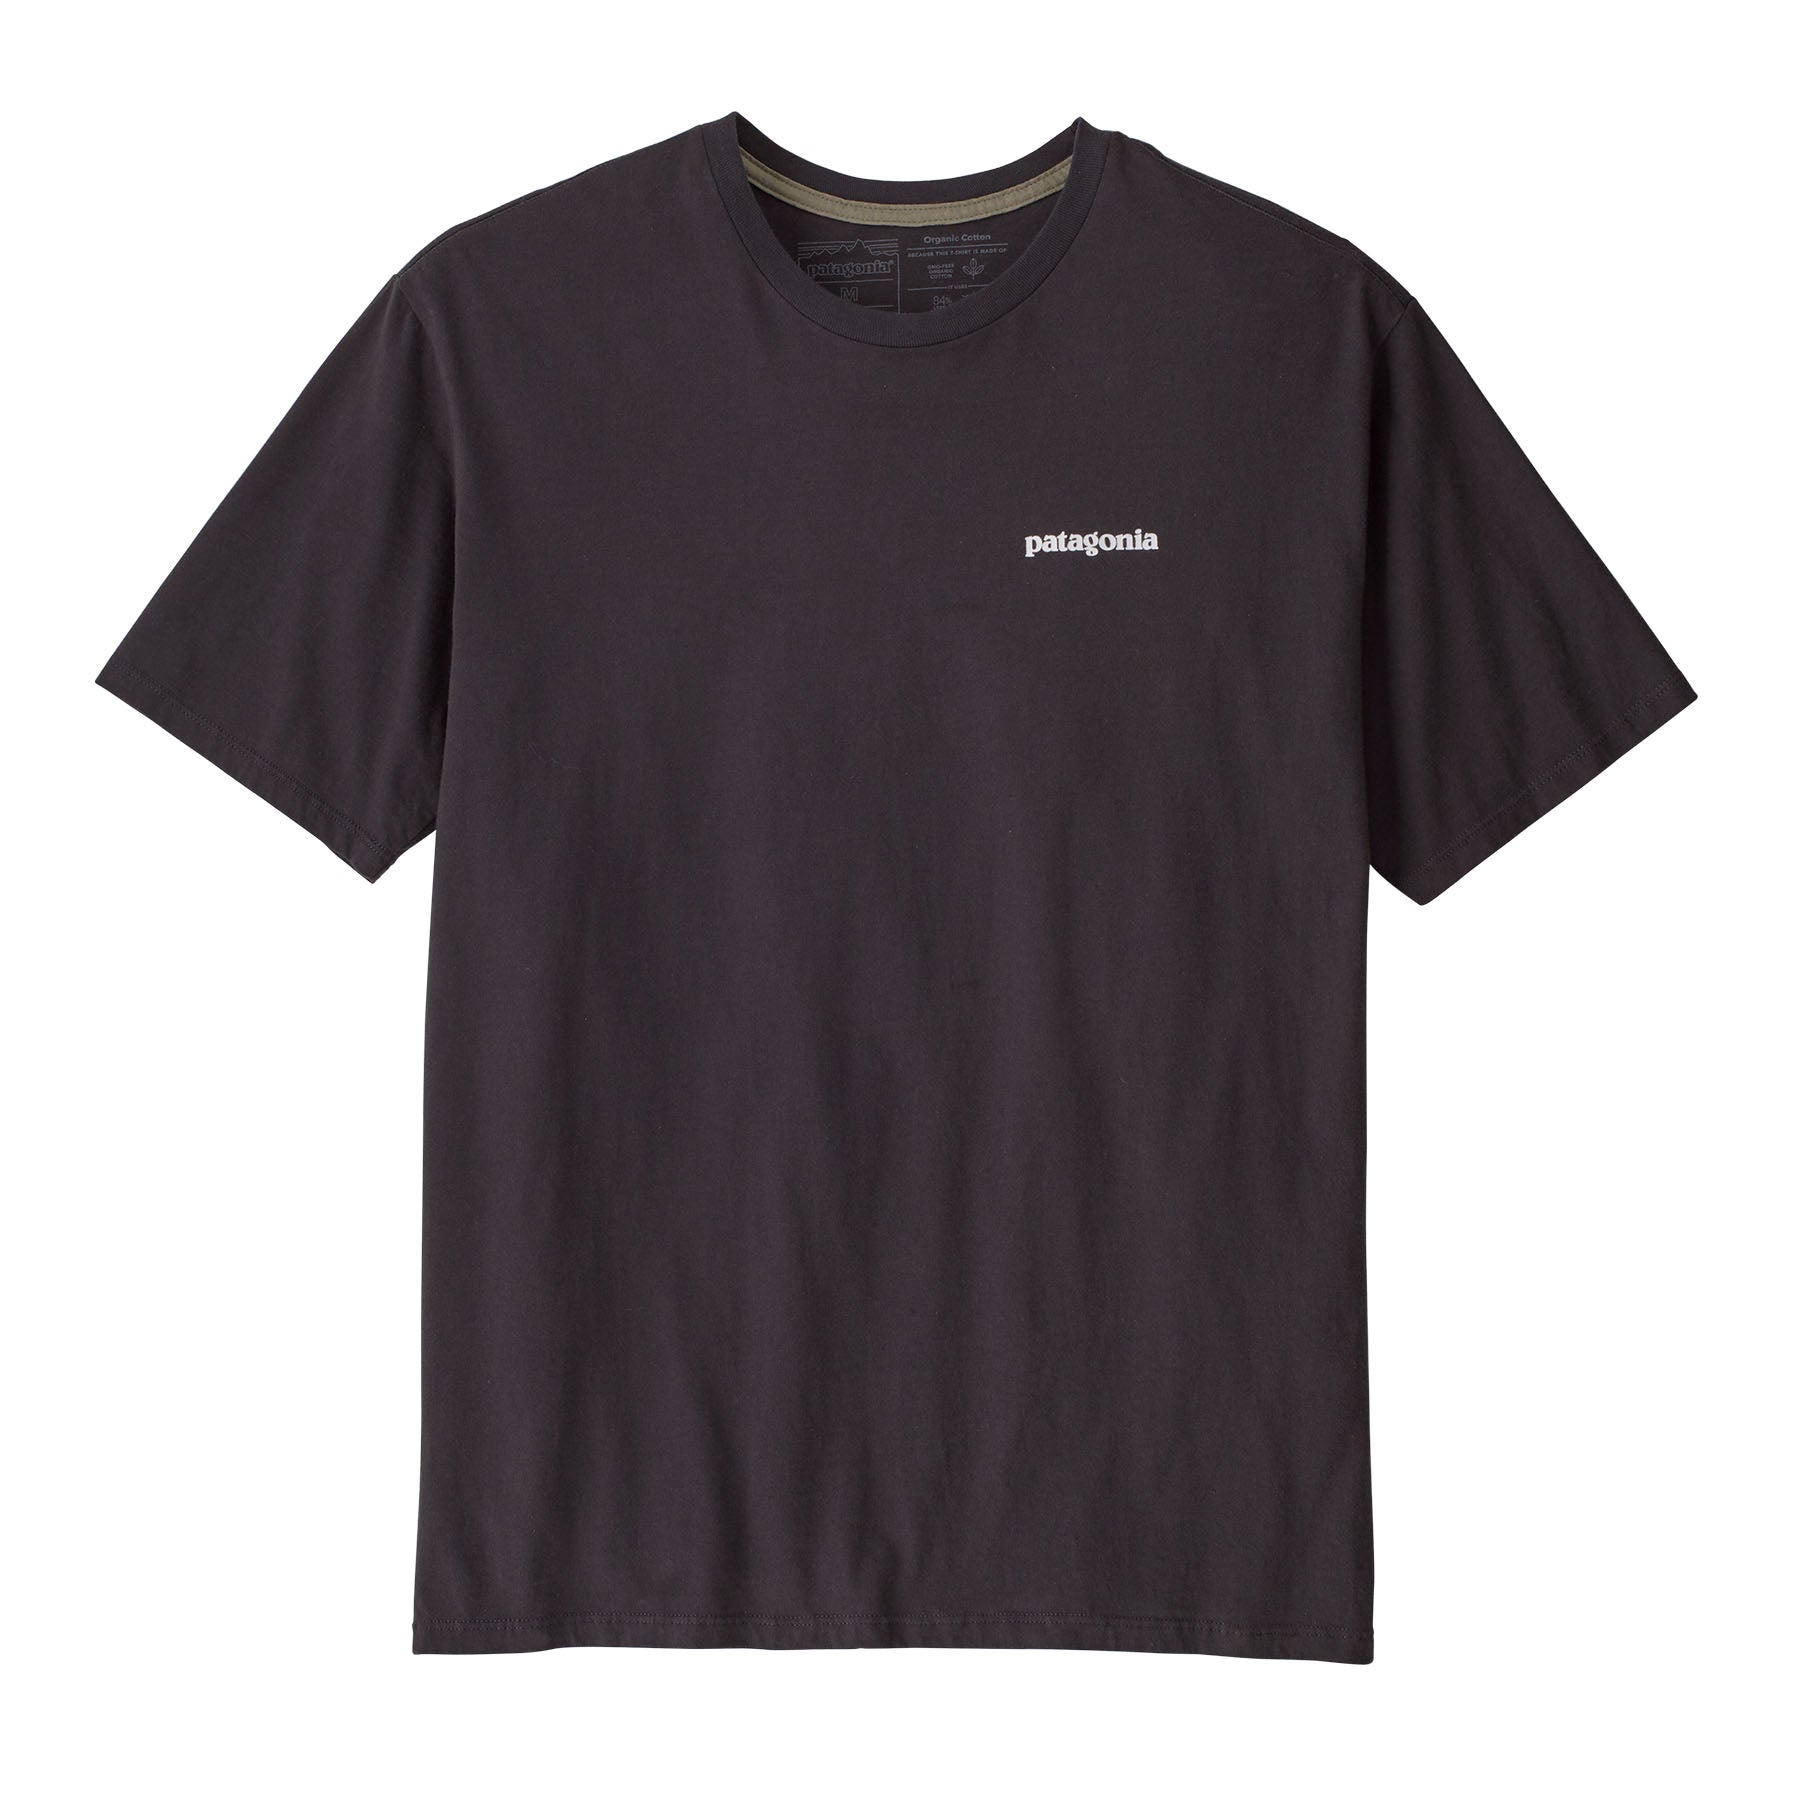 Patagonia M's Home Water Trout Organic T